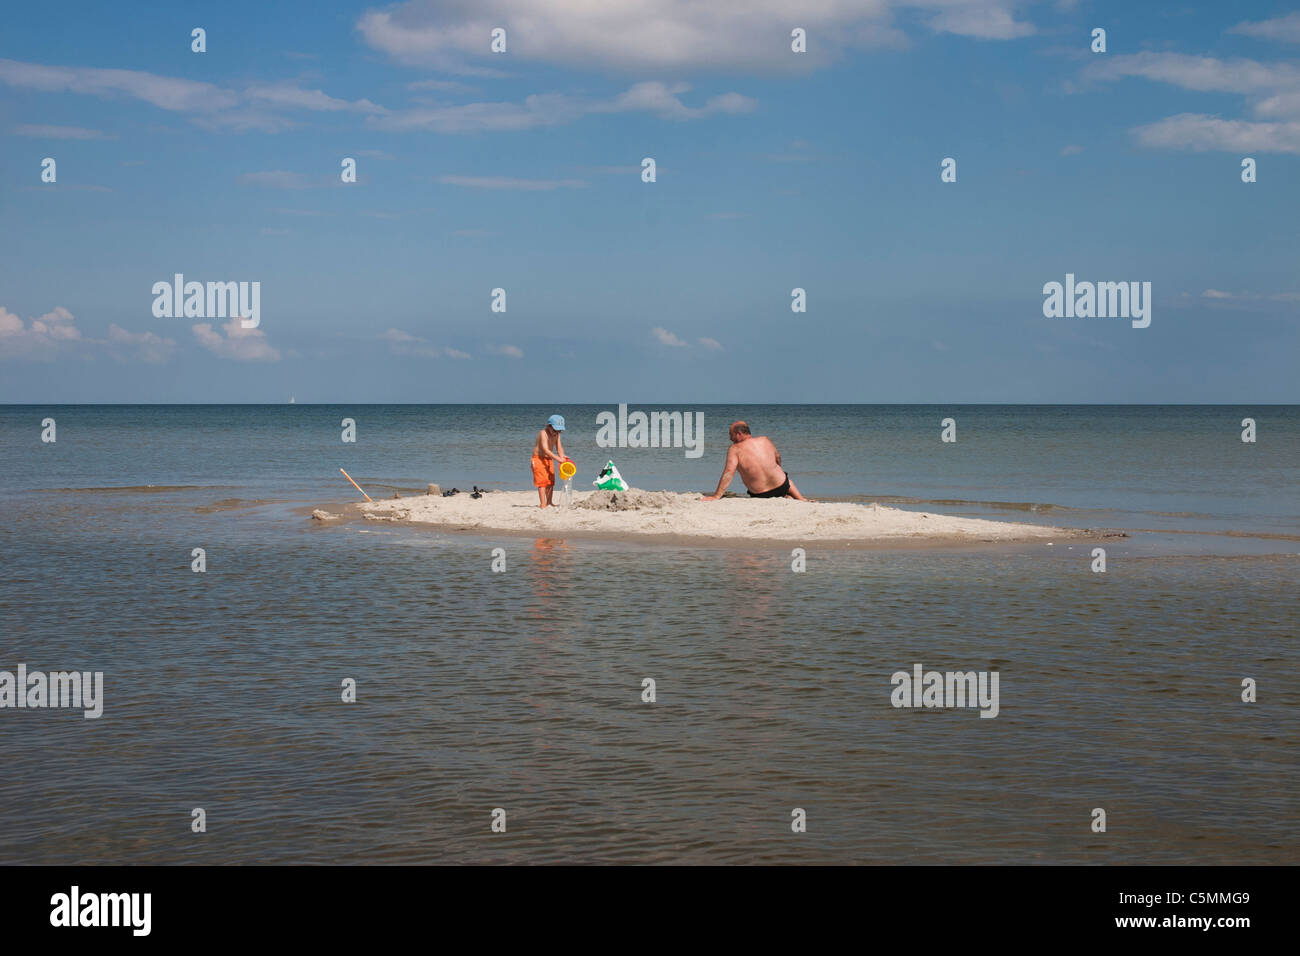 Danmark Ø High Resolution Stock Photography Images - Alamy